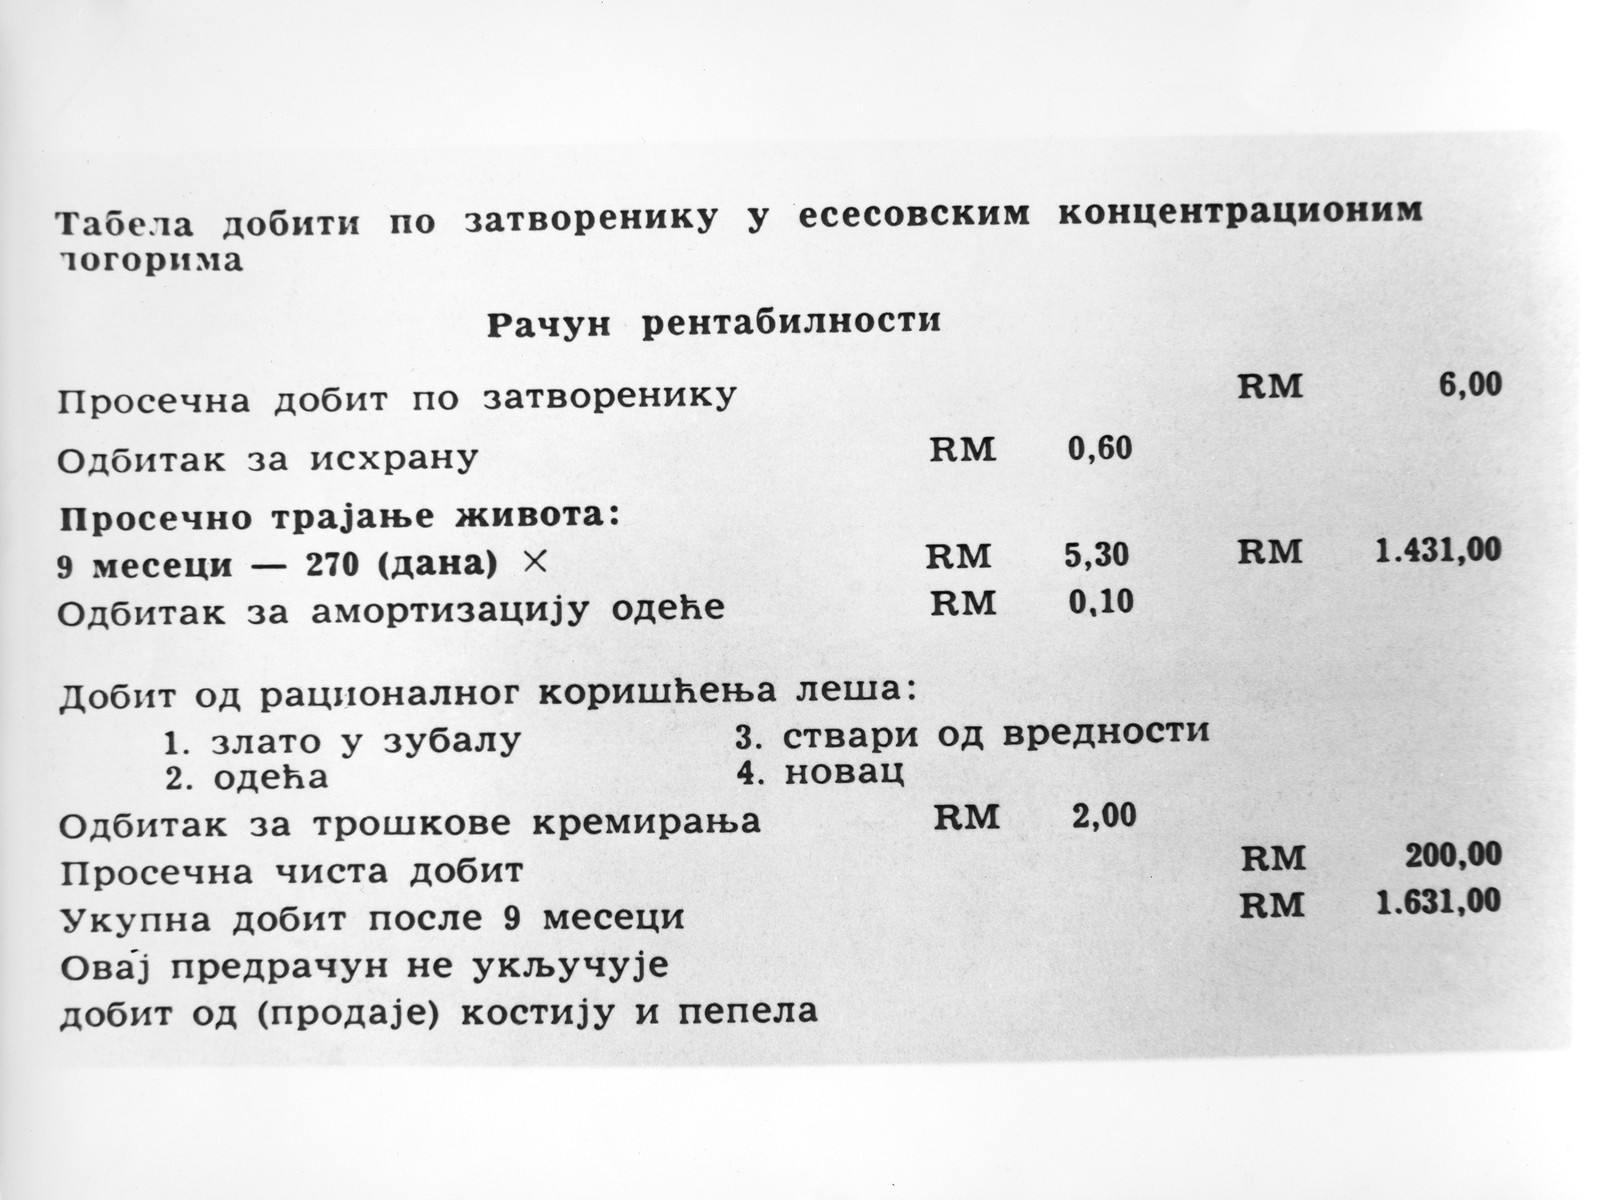 Table estimating the cost and value of SS concentration camp inmates.  The table includes the following categories: 
(1) approximate worth of each inmate:  6 RM; 
(2) cost of food:  .60 RM; 
(3) approximate life expectancy (9 months or 270 days):
     5.30 RM/ 1,431 RM;               
(4) cost of clothing:  .10 RM; 
(5) value of the prisoners' corpses: 
     (a) gold and teeth; 
     (b) clothing; 
     (c) valuables; 
     (d) money
(6) Cost of cremation:  2 RM
(7) Recurring value:  200 RM
(8) Total value after 9 months:  1,631 RM
The table concludes with the note: "This estimate does not include value from the sale of bones and dust."